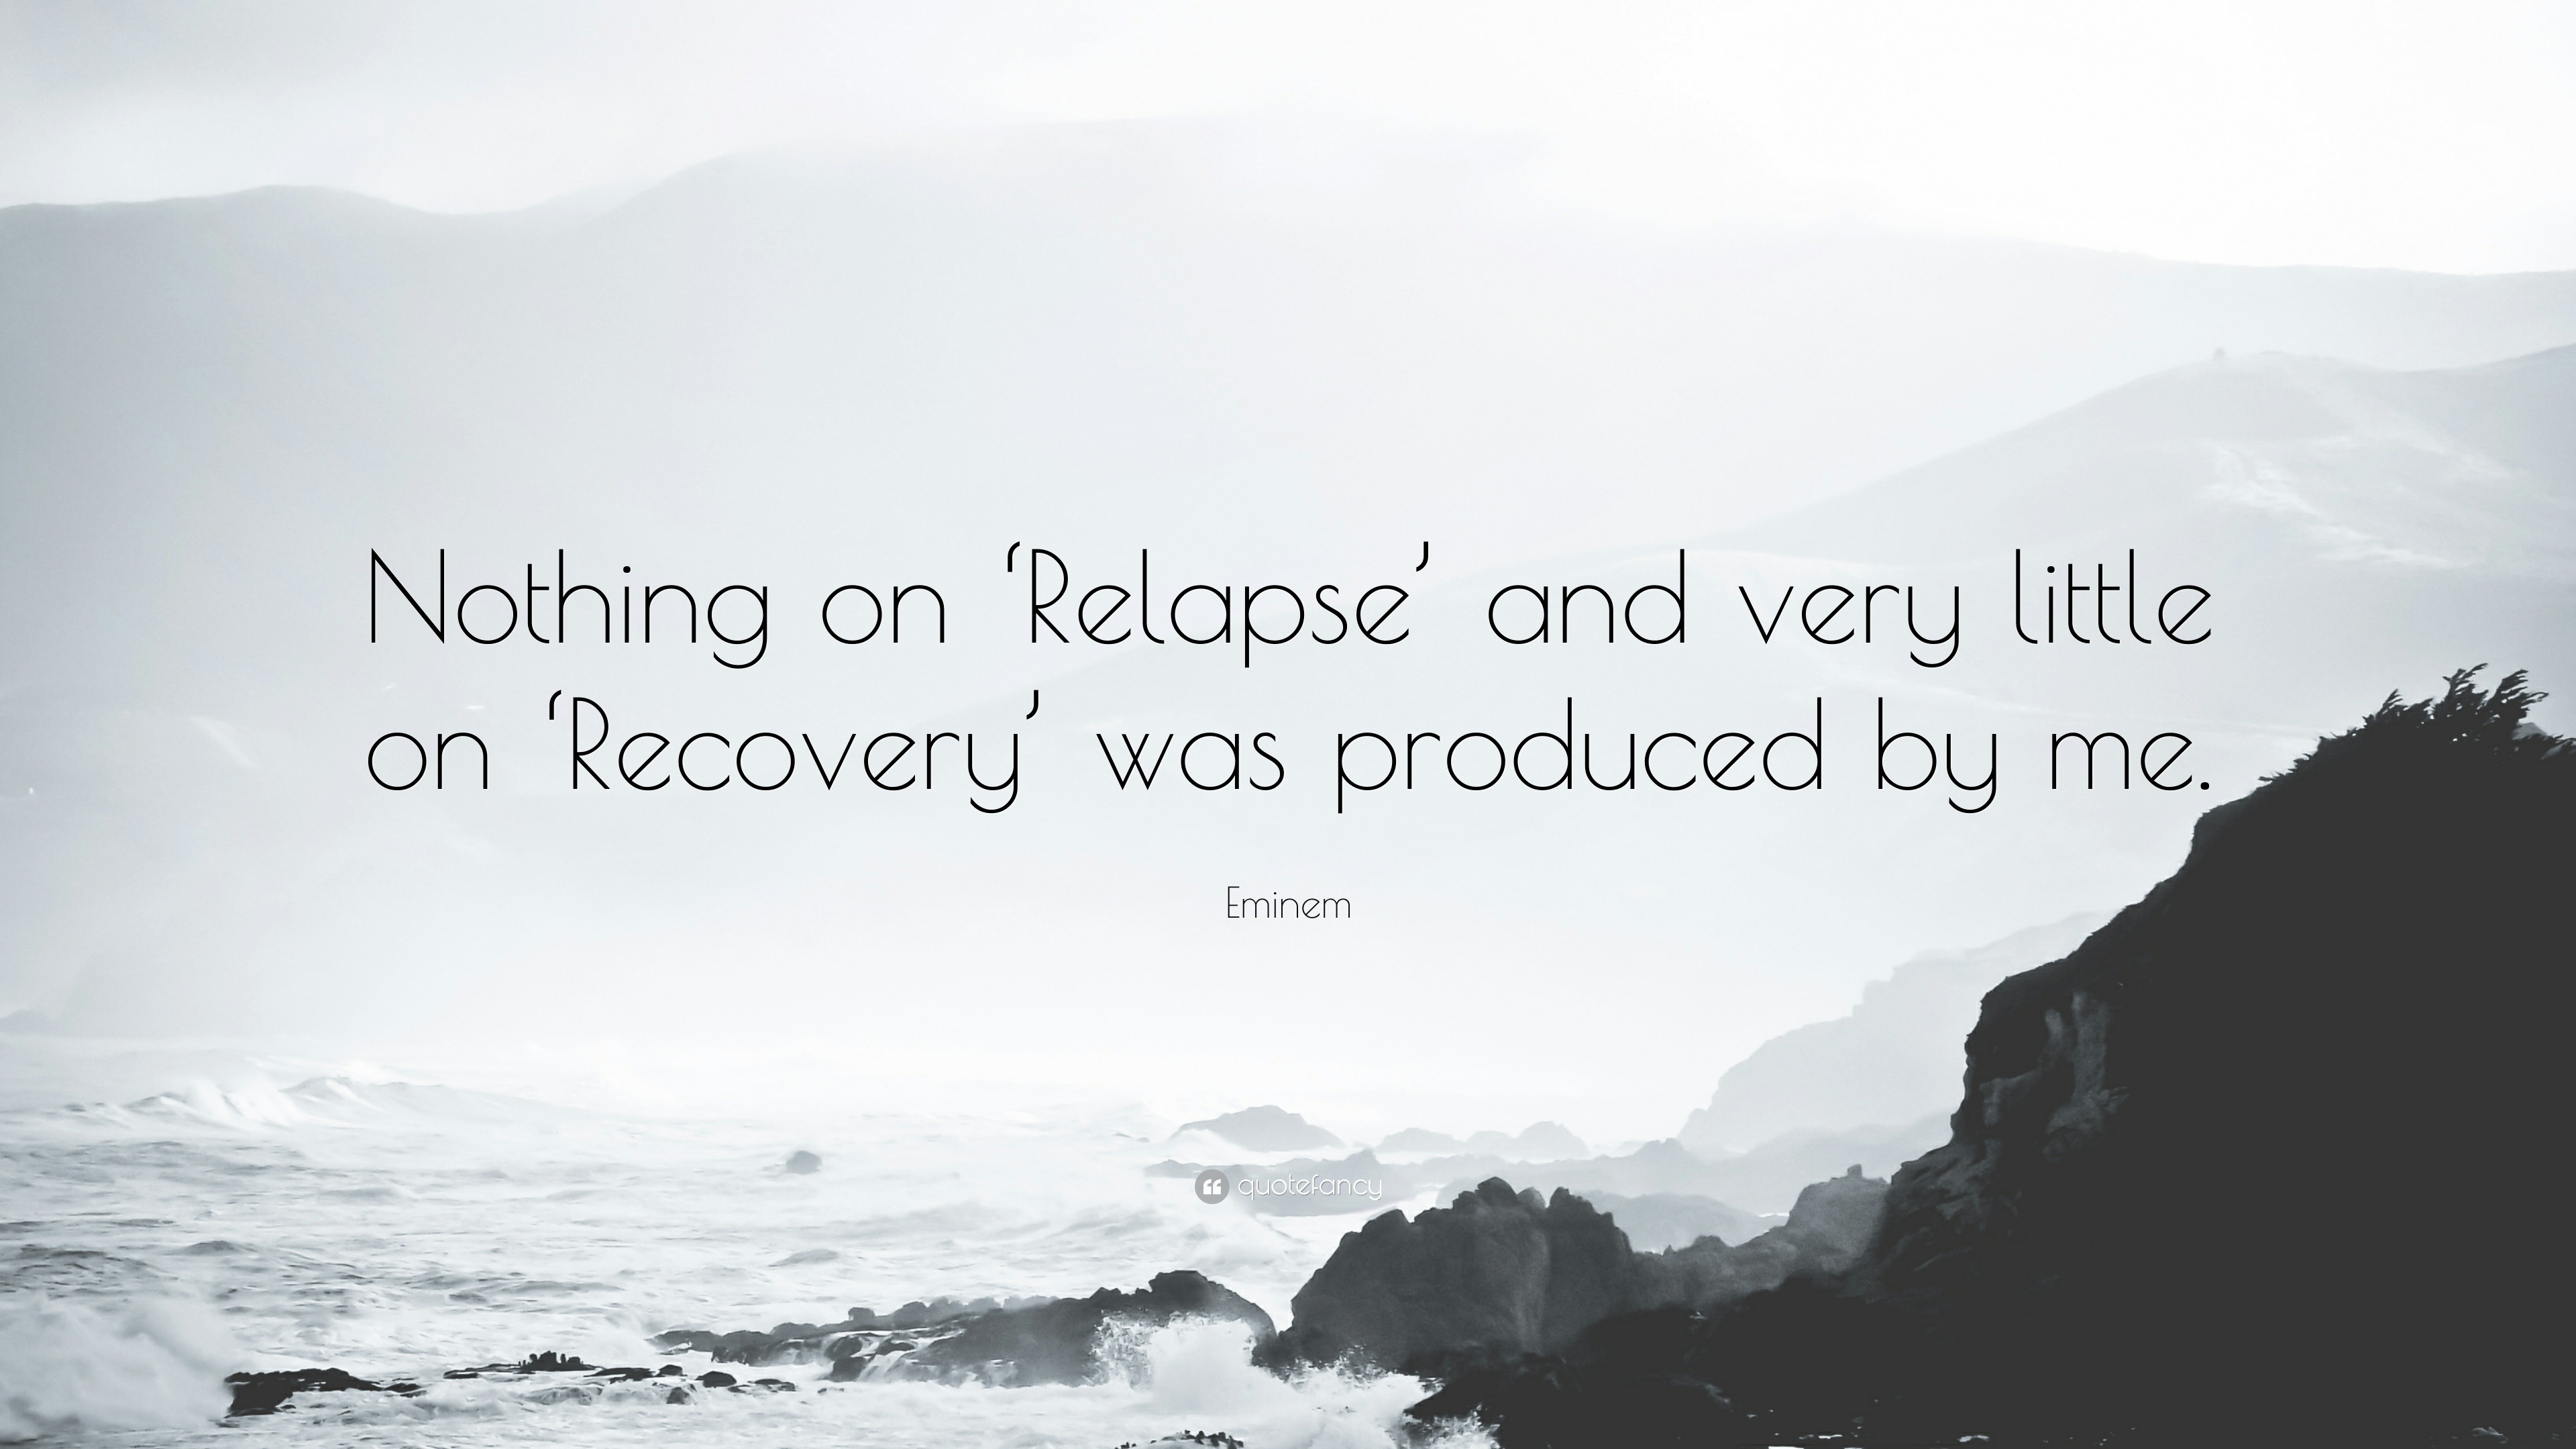 Eminem Quote: “Nothing on 'Relapse' and very little on 'Recovery' was  produced by me.”